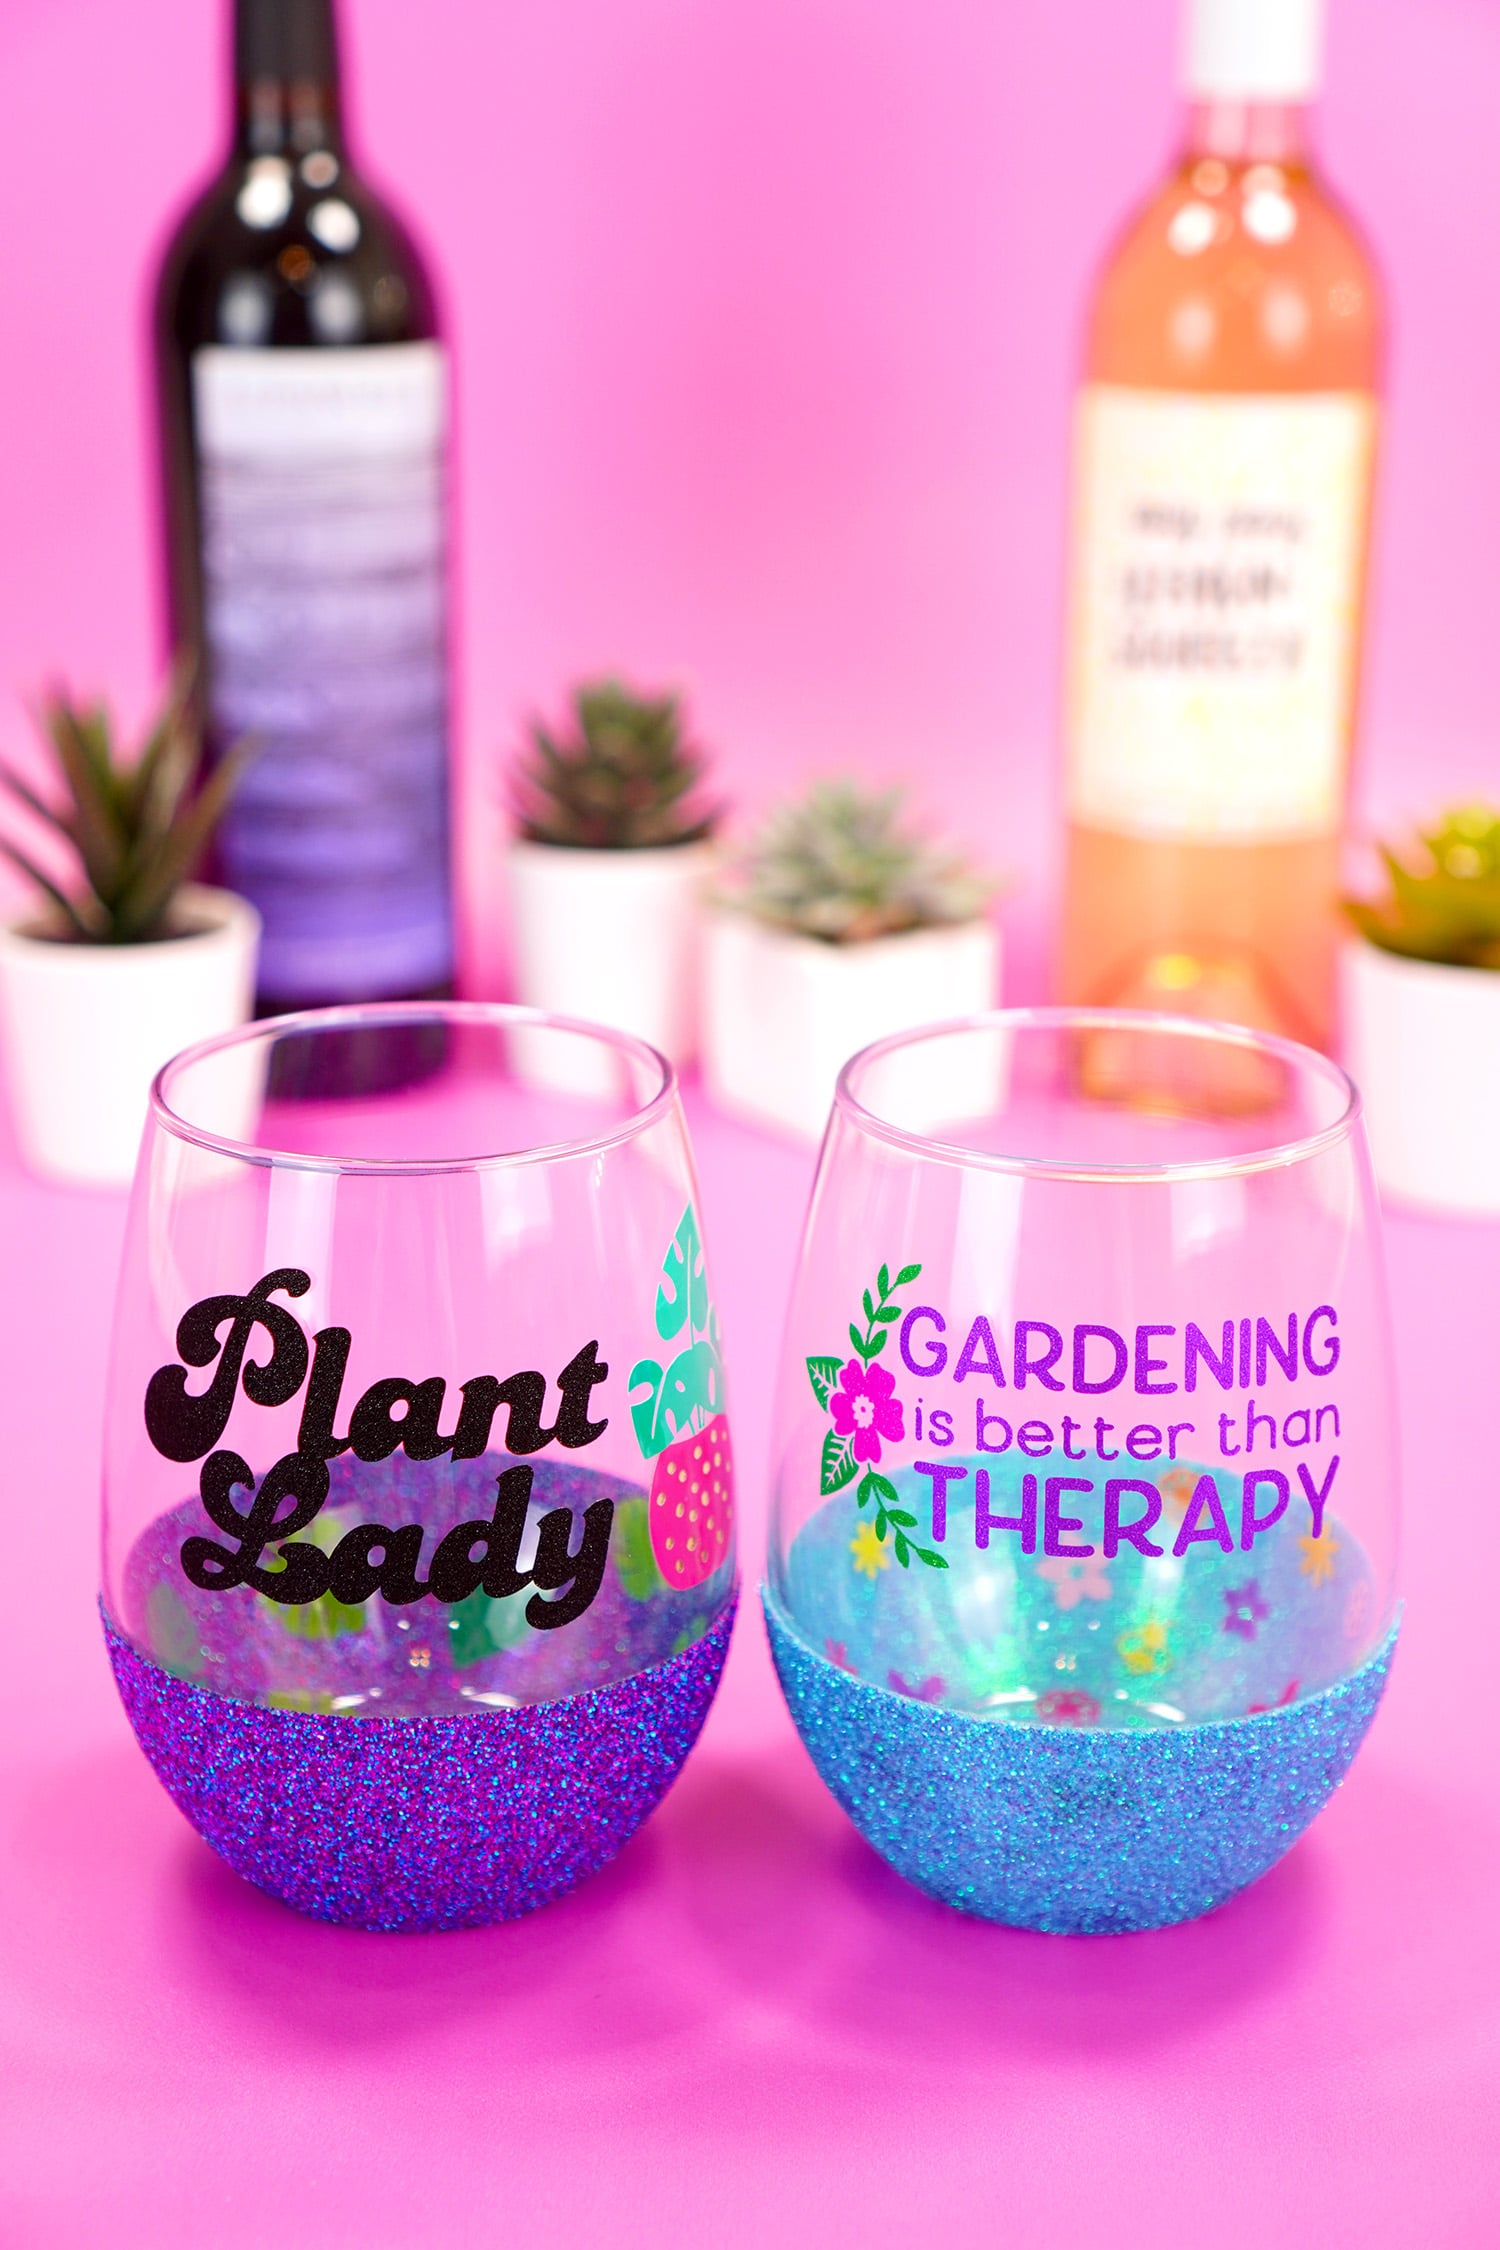 "Plant Lady" stemless wine glass with purple glitter base and "Gardening is Better Than Therapy" wine glass with blue glitter base